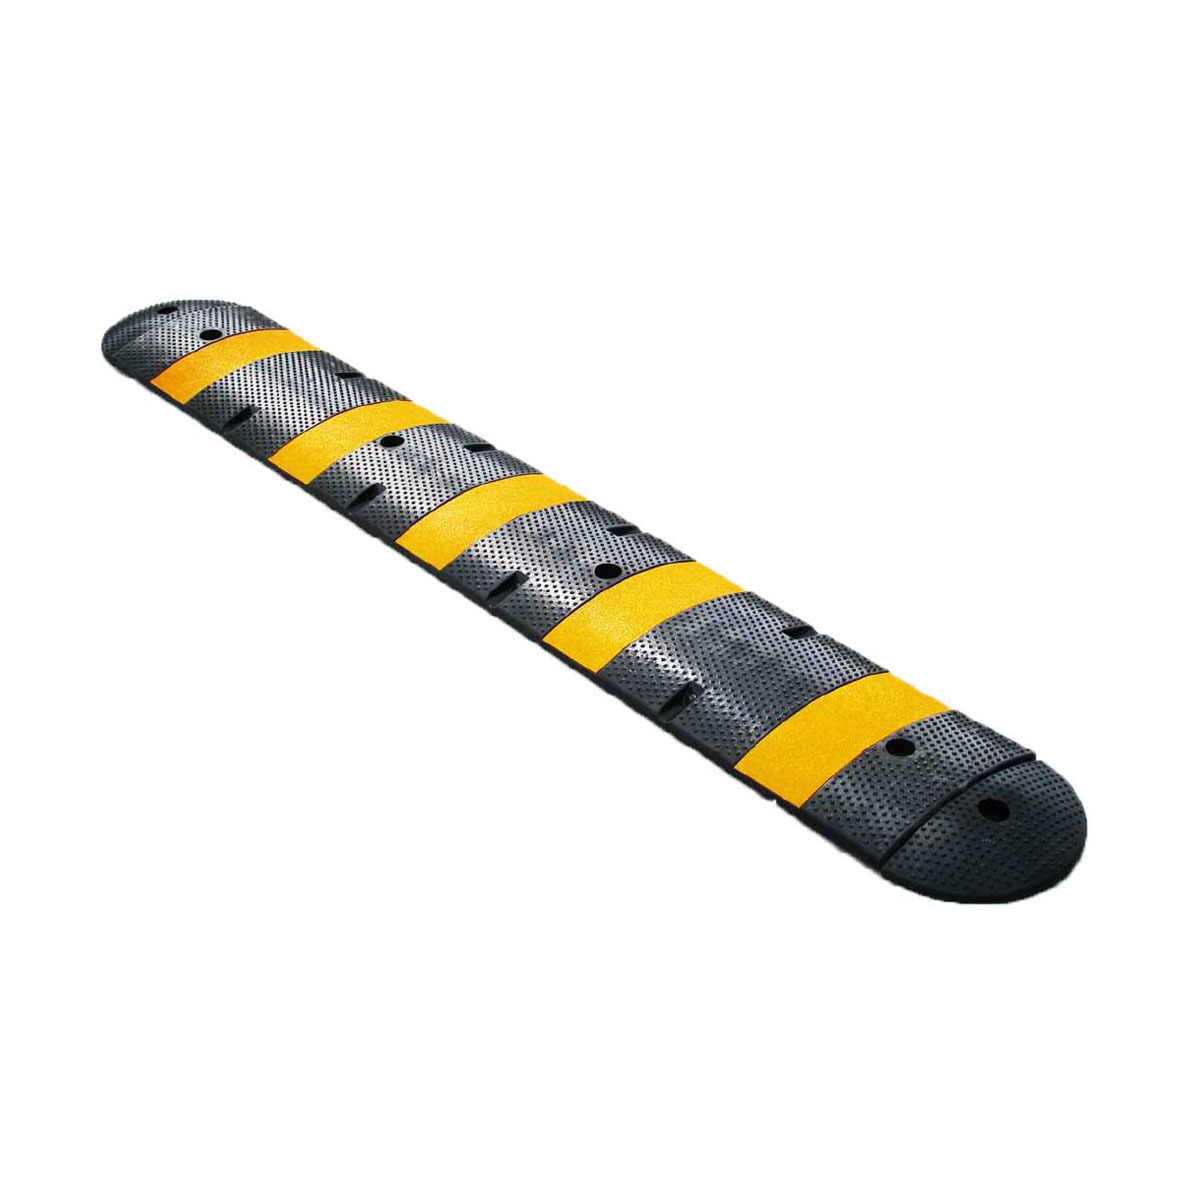 Buy Rubber Speed Hump 1830mm in Speed Humps from Astrolift NZ